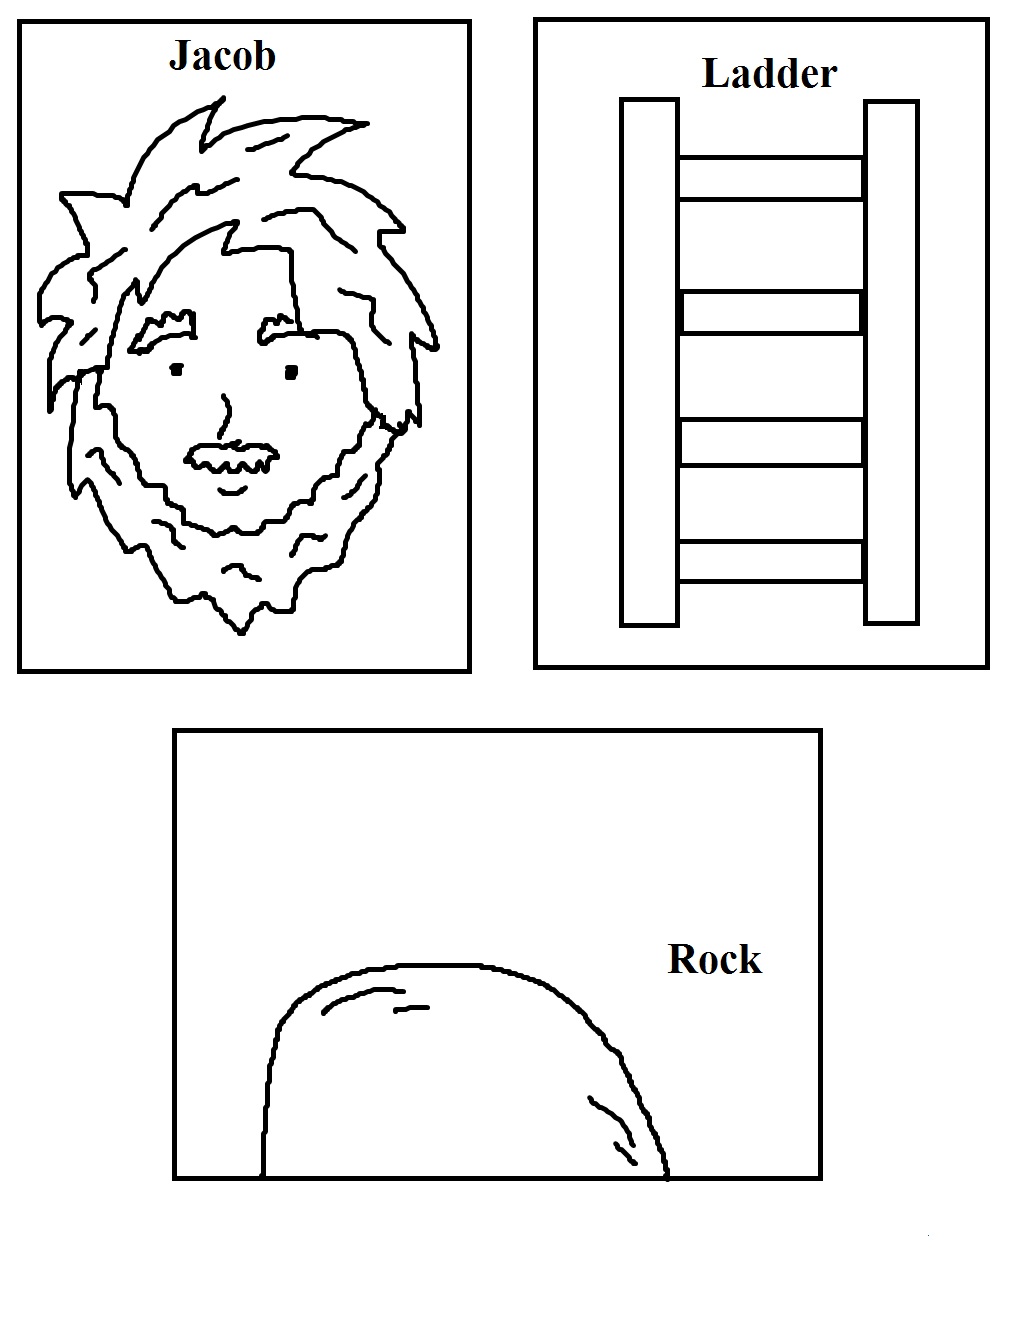 6300 Bible Coloring Pages Jacobs Ladder Download Free Images